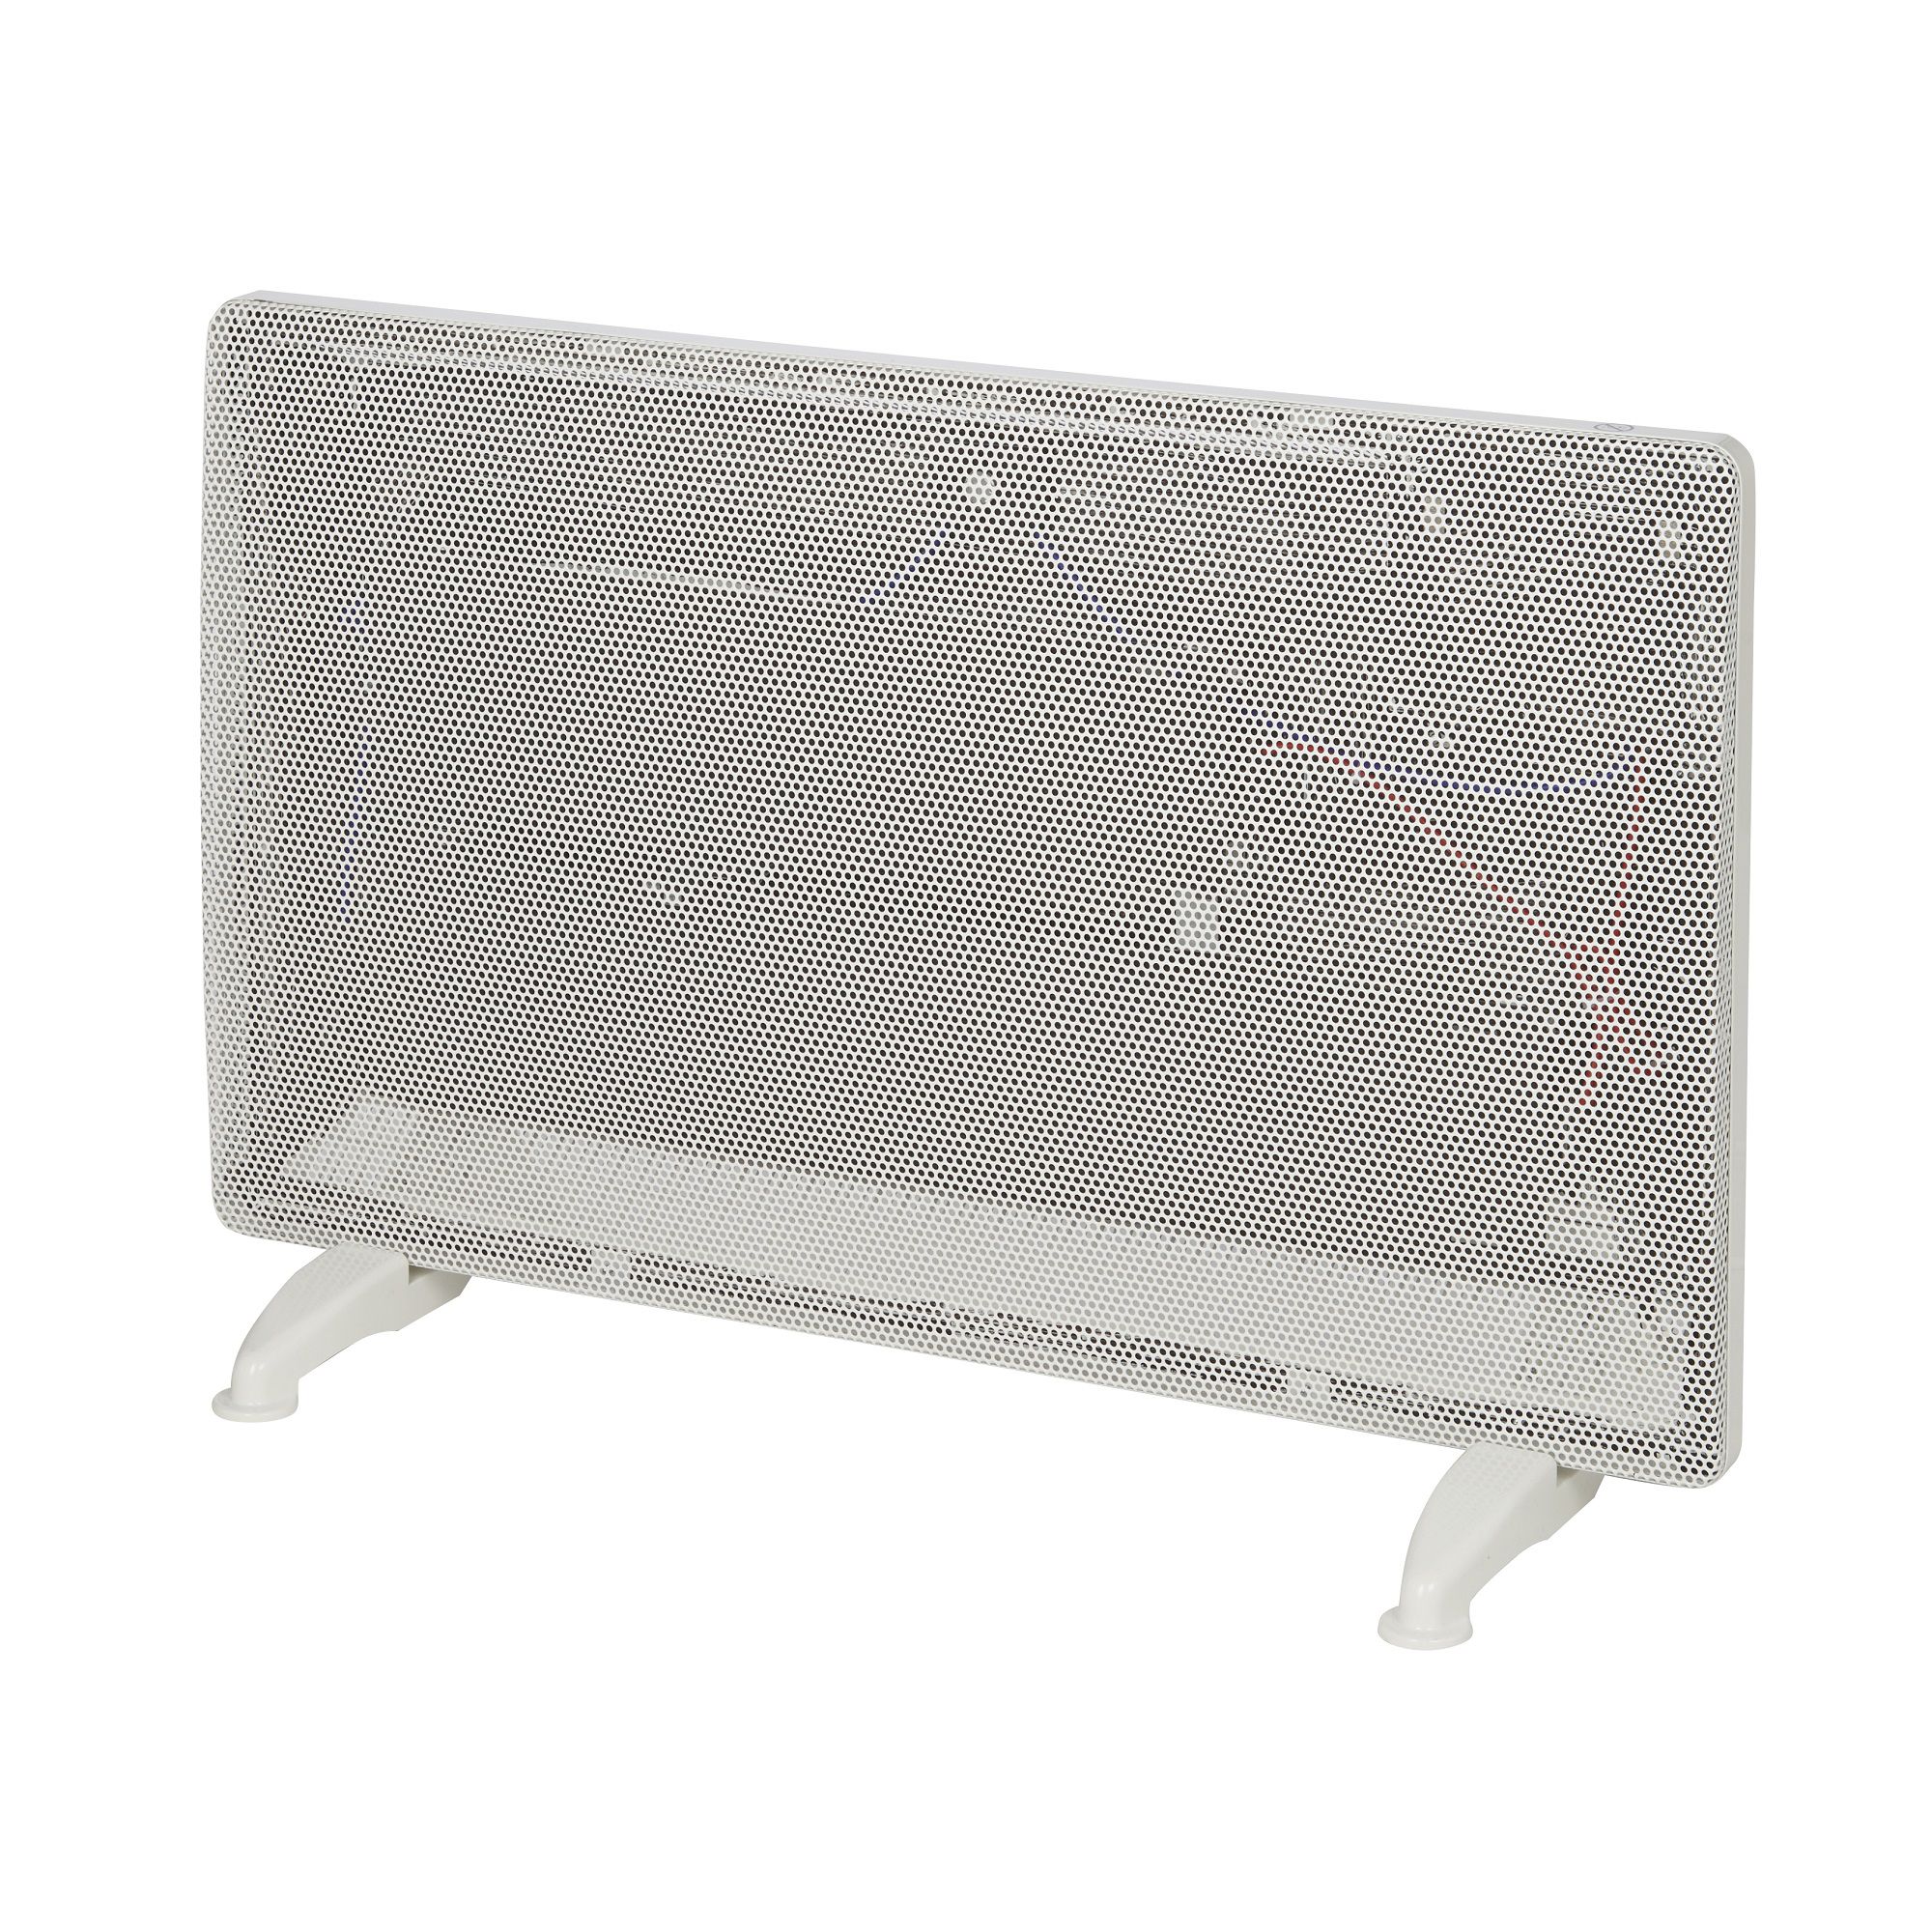 Electric 1500kW White Panel heater